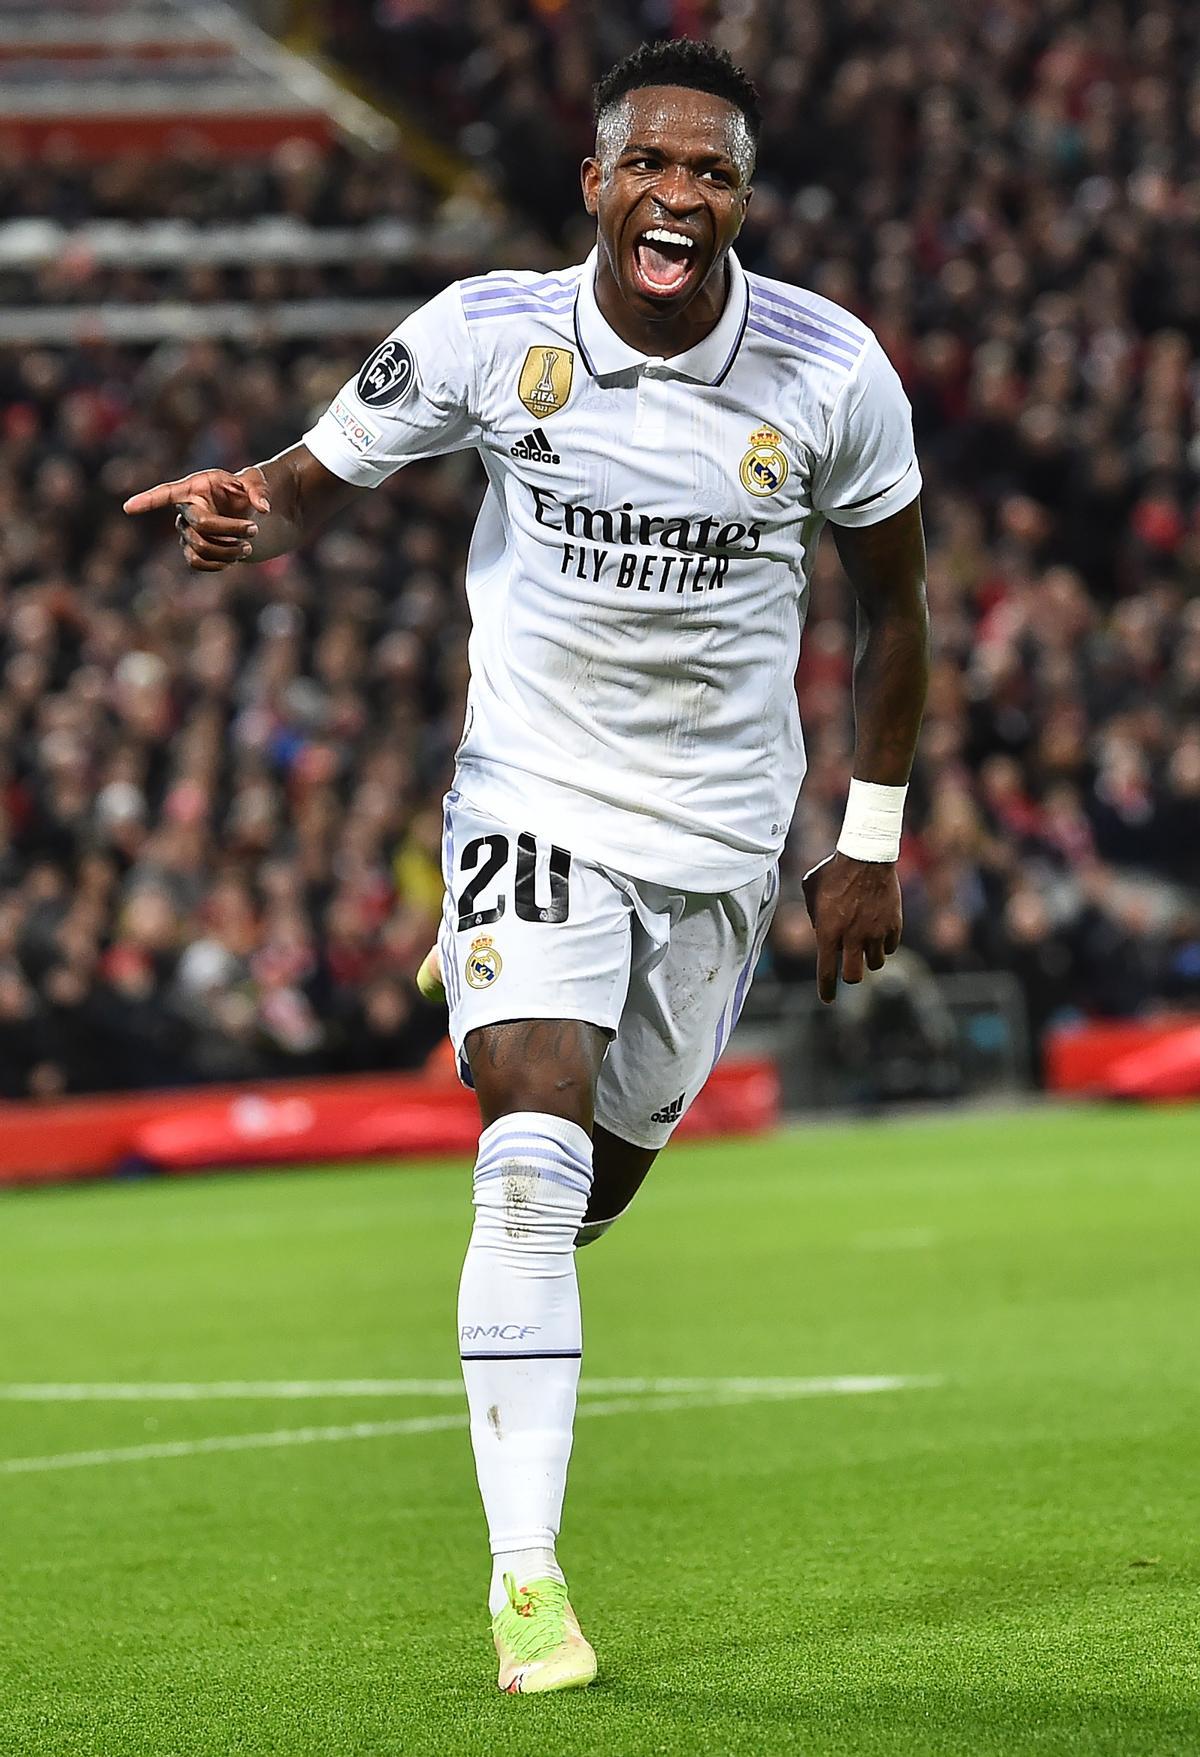 Liverpool (United Kingdom), 21/02/2023.- Vinicius Junior of Real Madrid celebrates after scoring his second goal during the UEFA Champions League, Round of 16, 1st leg match between Liverpool FC and Real Madrid in Liverpool, Britain, 21 February 2023. (Liga de Campeones, Reino Unido) EFE/EPA/Peter Powell